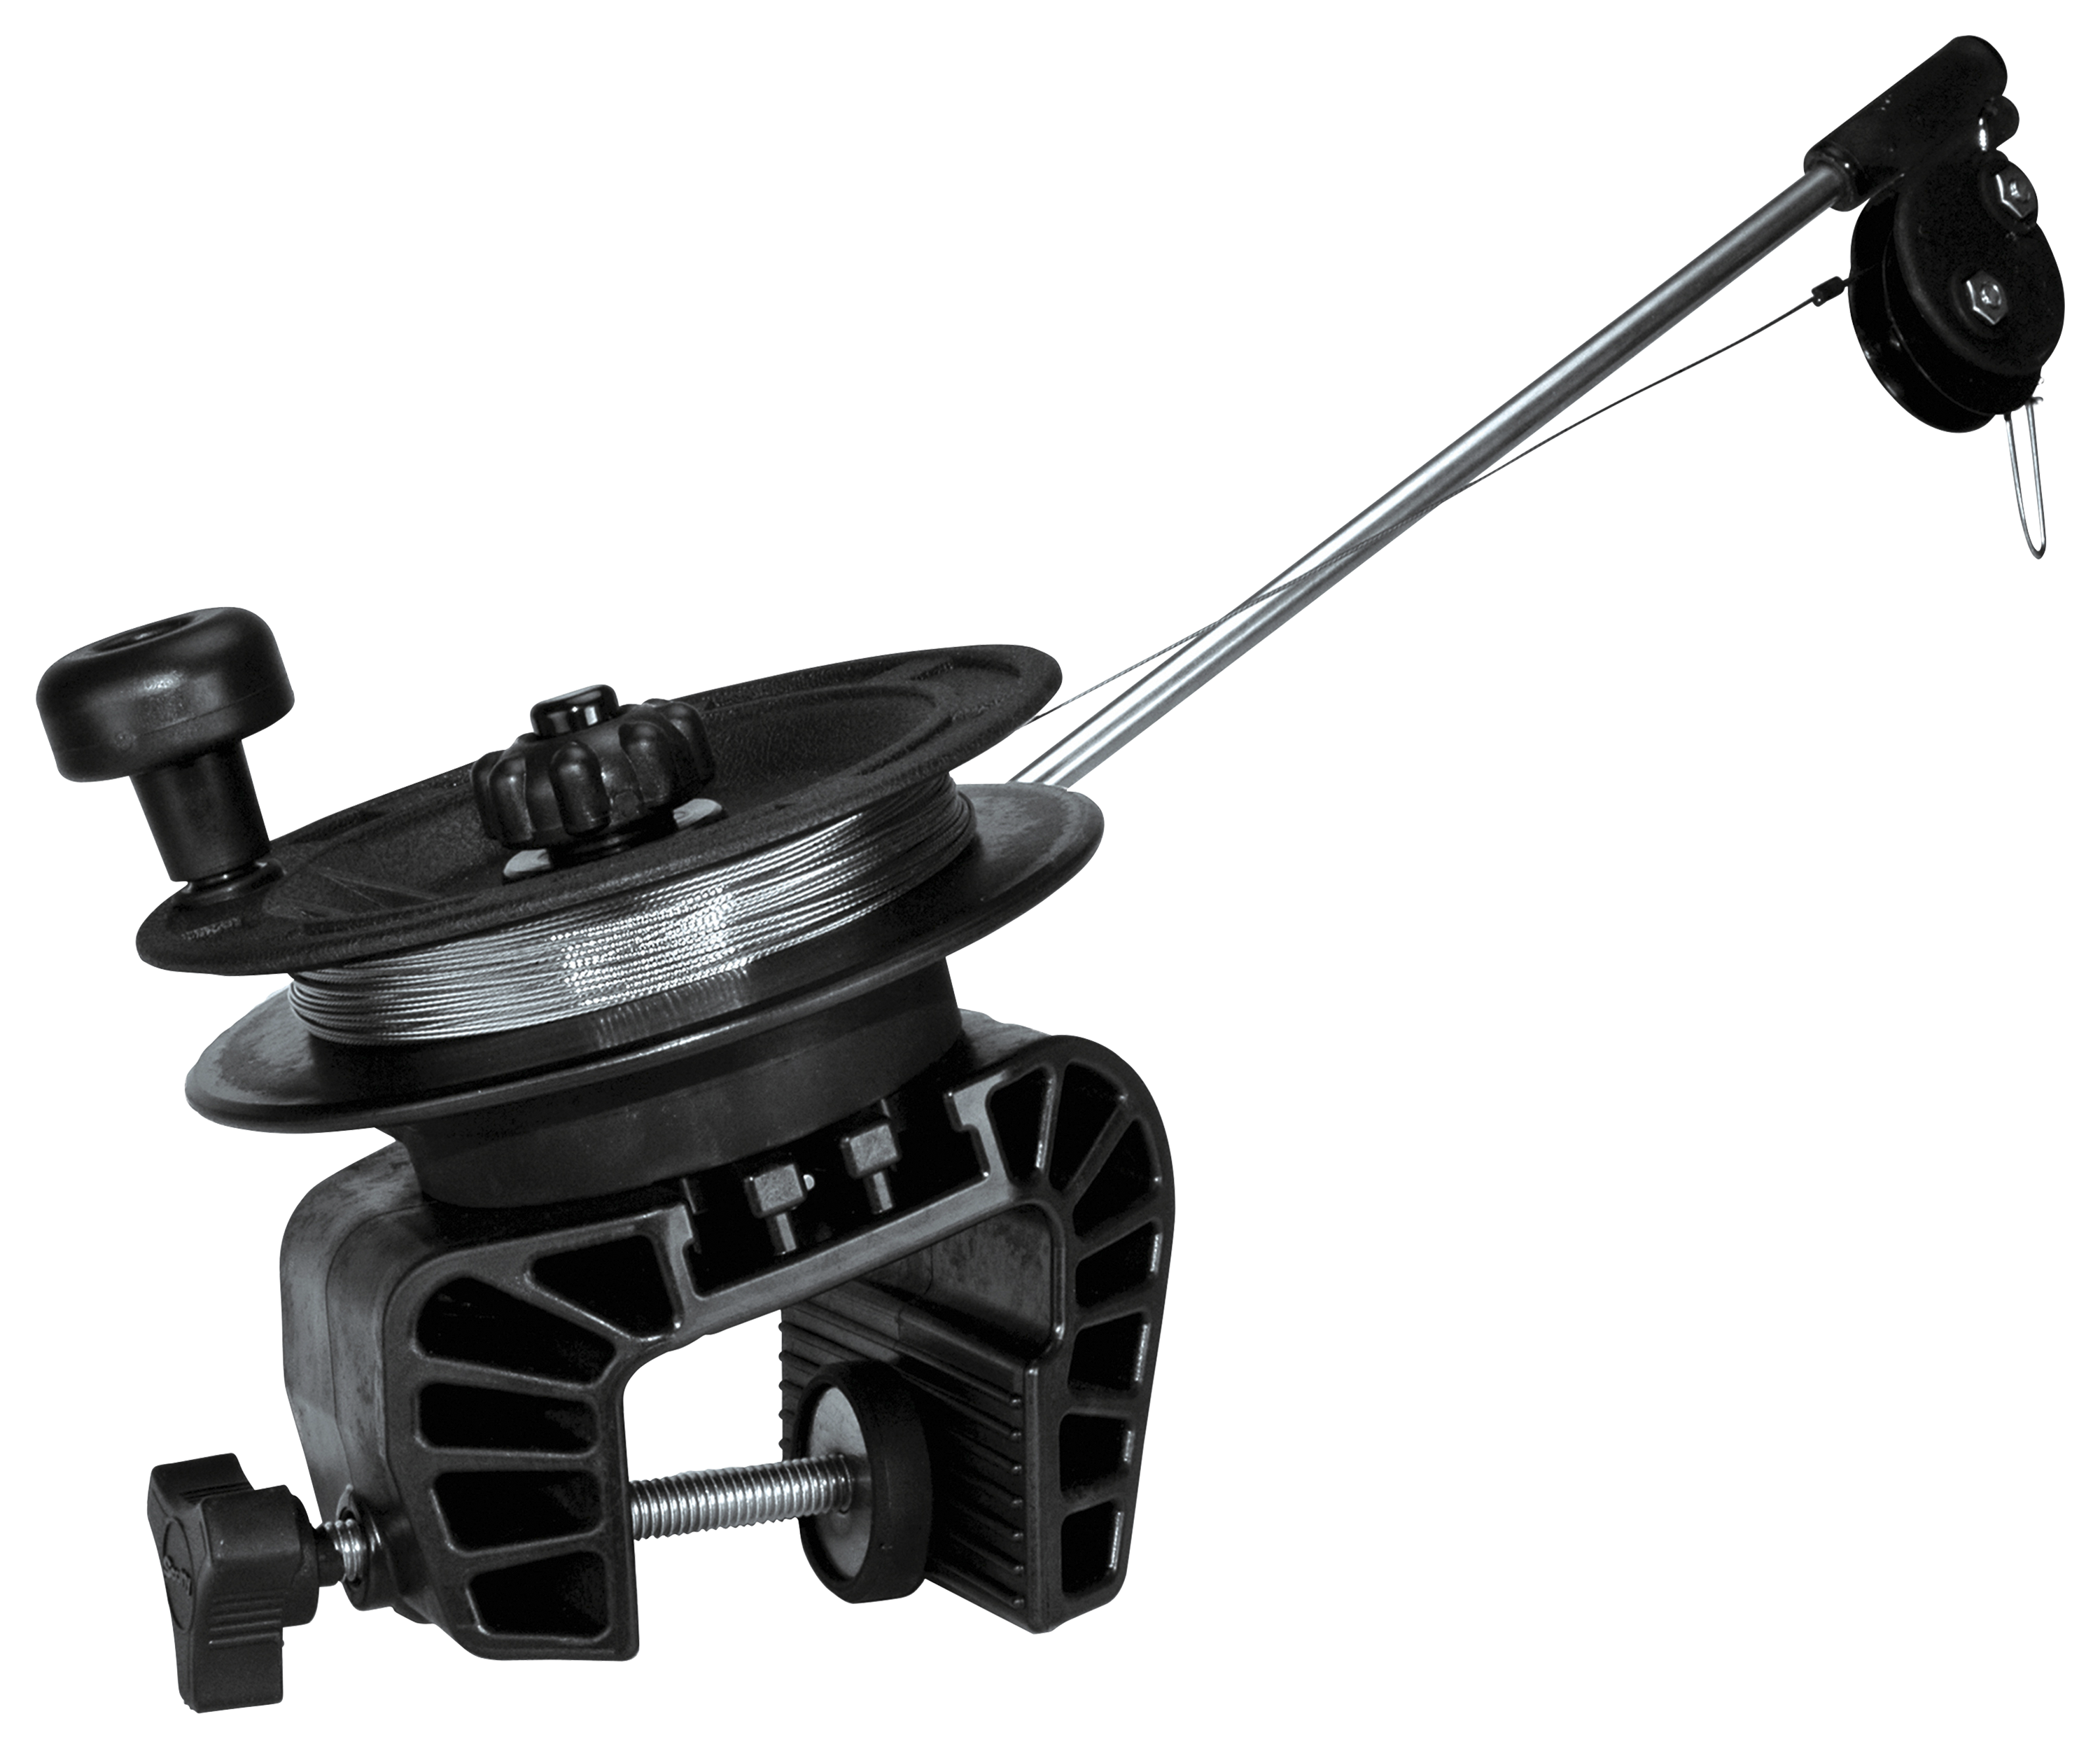 Scotty Laketroller Manual Downrigger with Portable Clamp Mount